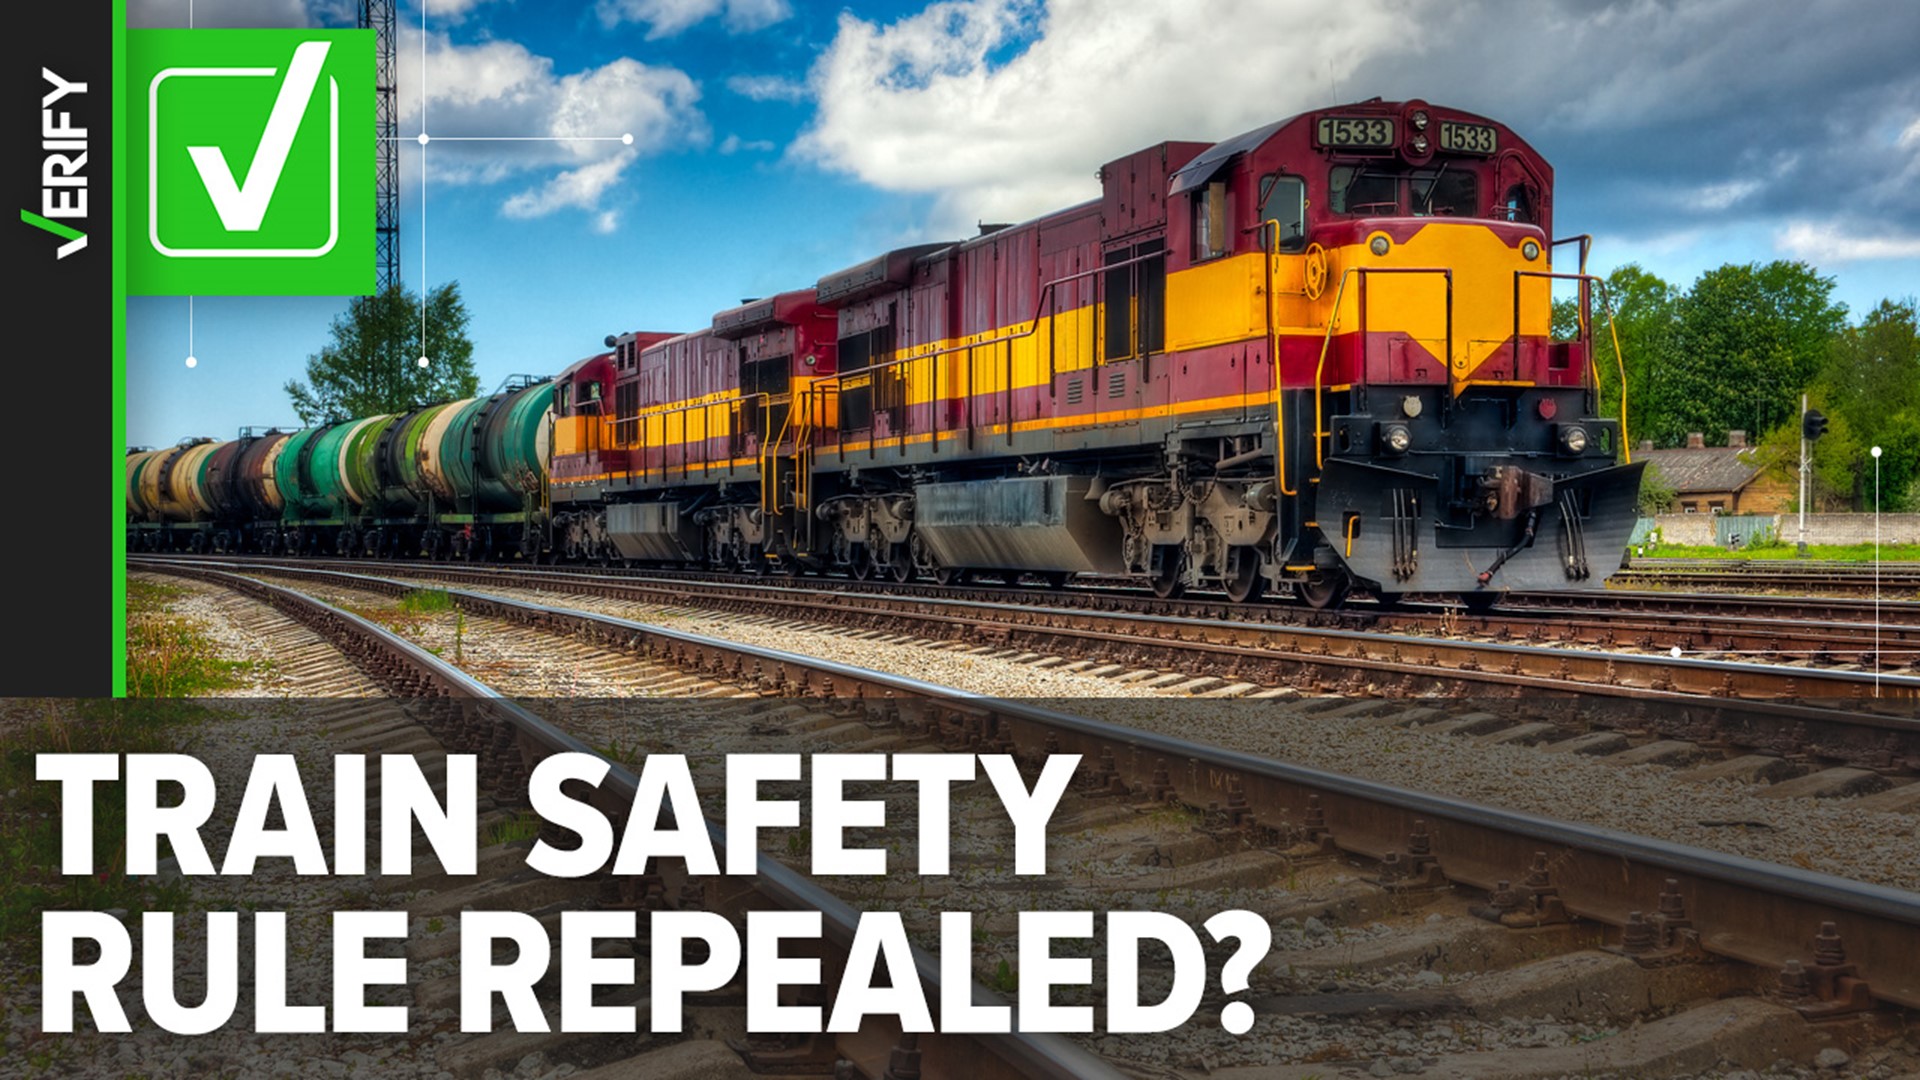 The Department of Transportation repealed a mandate in 2018 that required safer brakes on trains that carried hazardous materials.